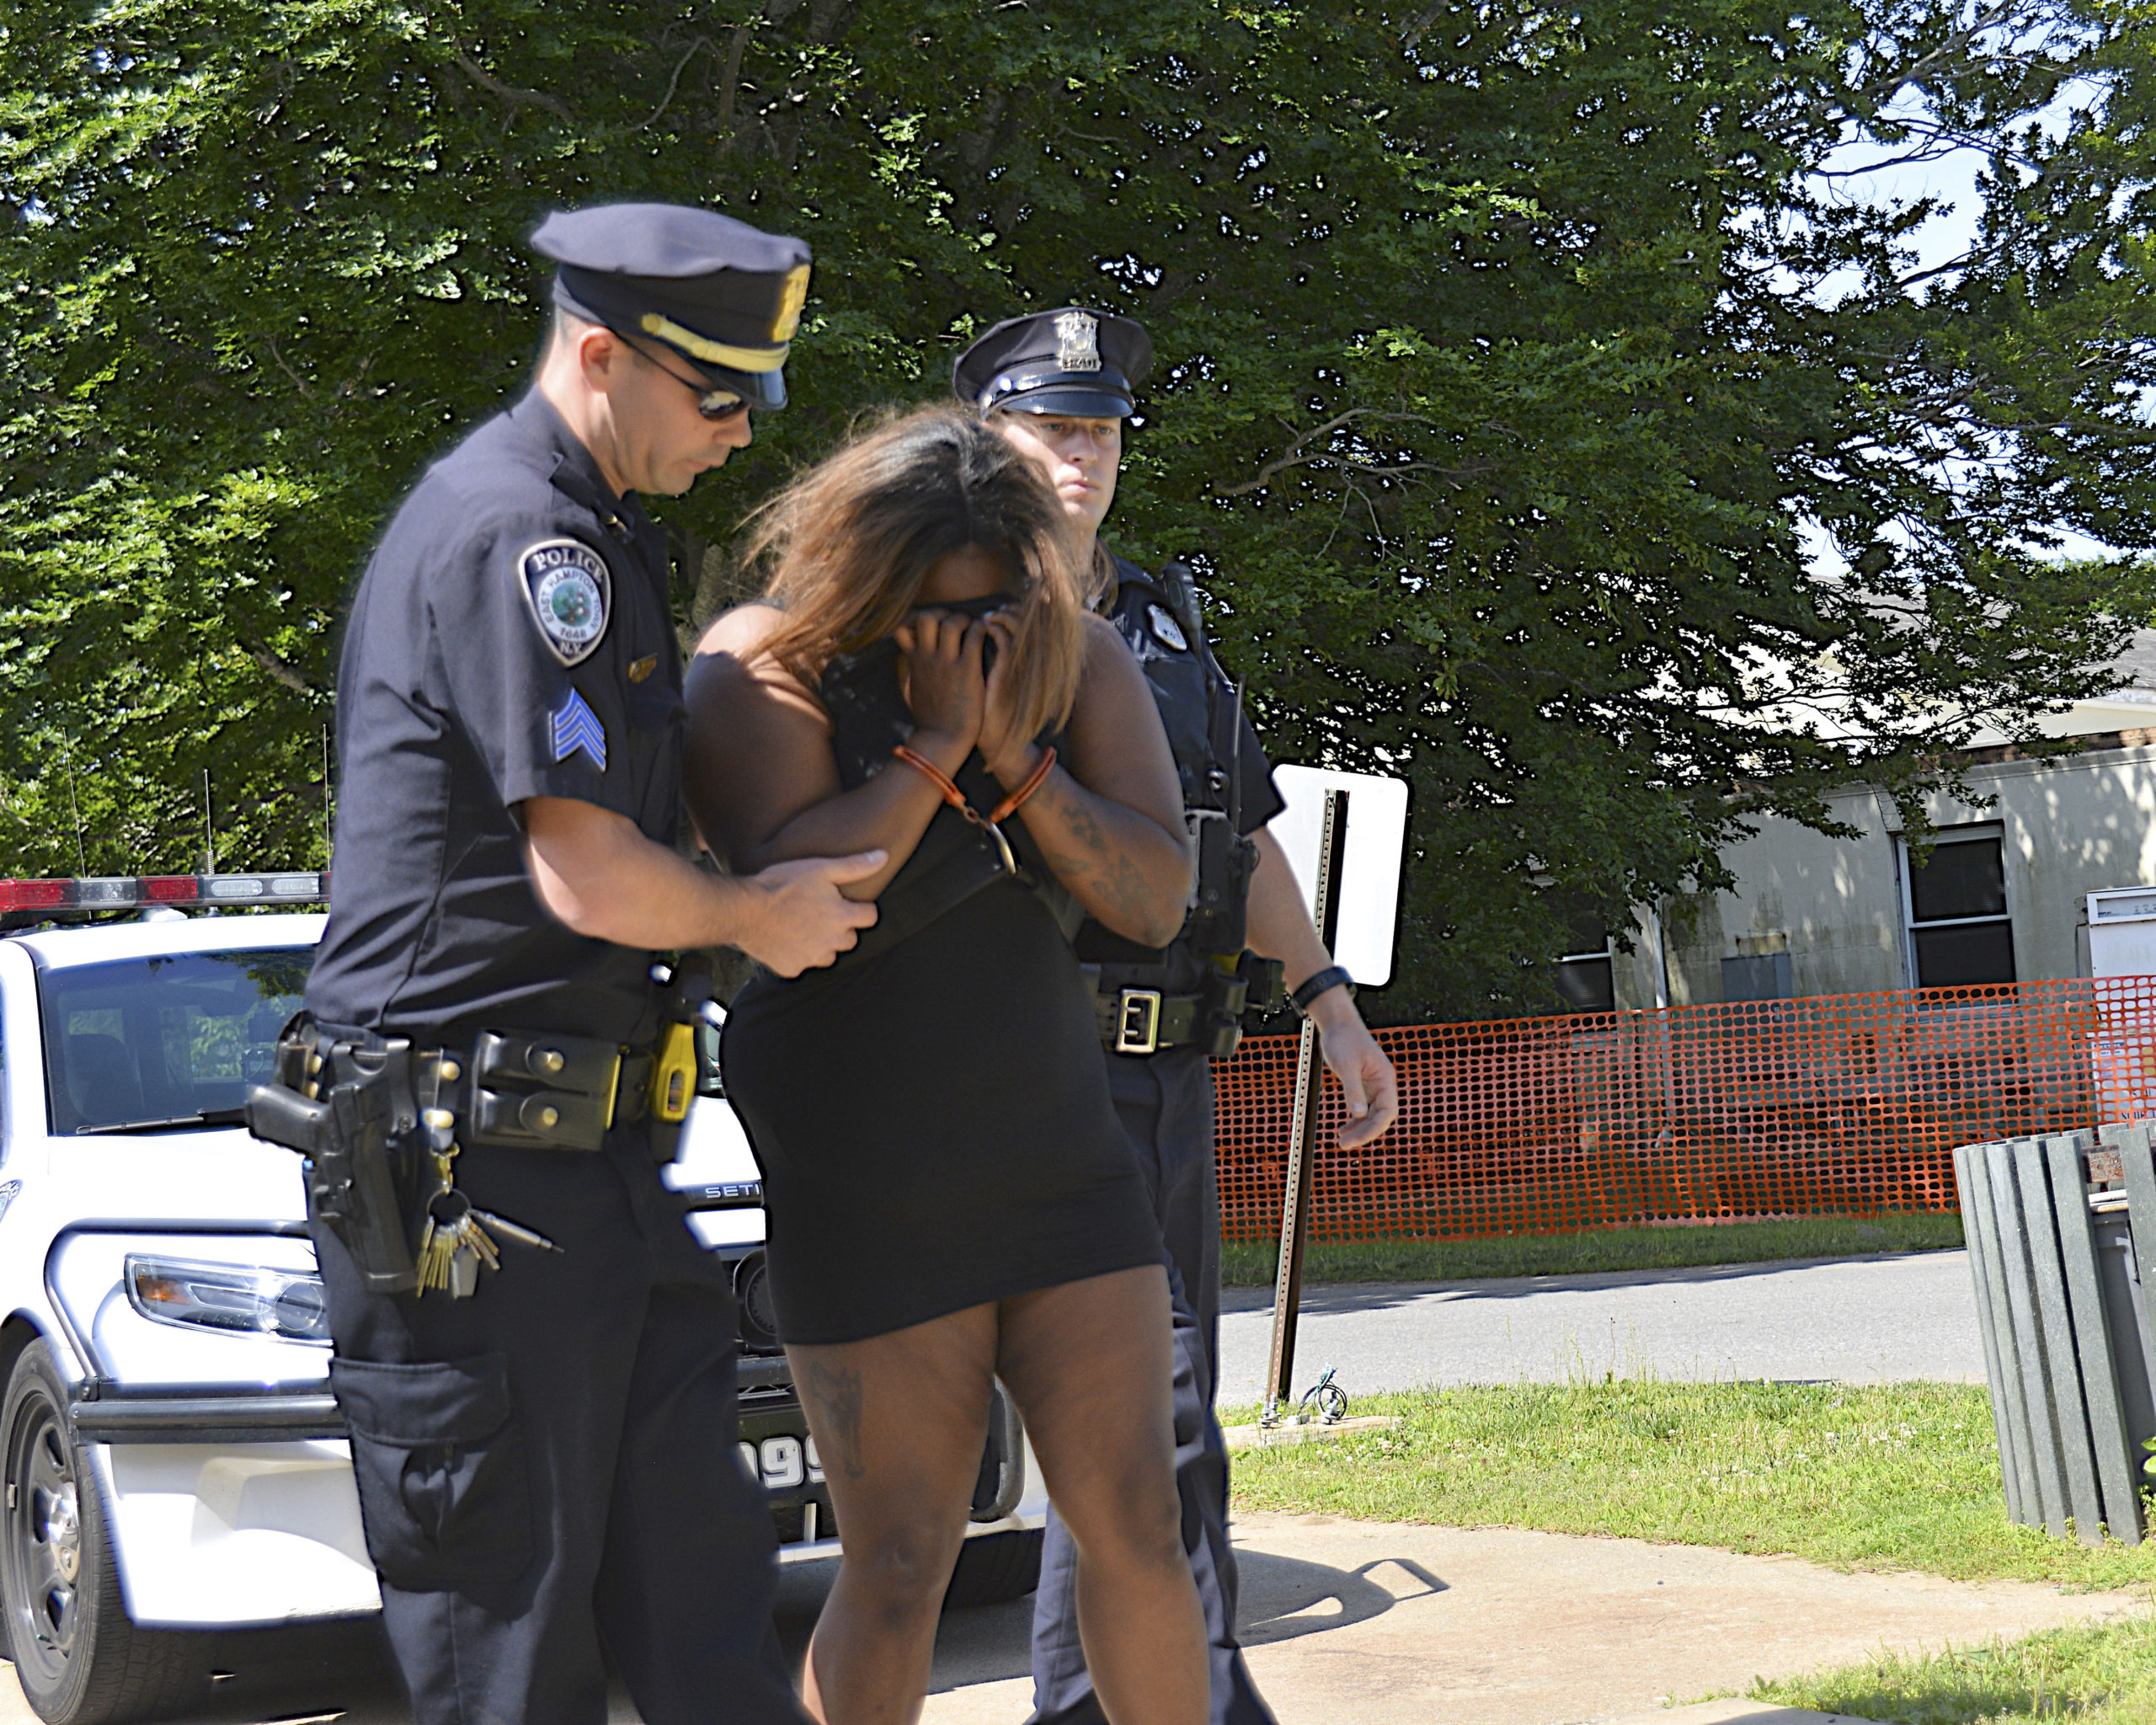 'Beyond Tragic'
July 3 -- A 24-year-old mother who investigators say had killed her two toddlers earlier in the day begged East Hampton Town Police officers to shoot her as they approached her car in Montauk last Thursday afternoon, June 27. The woman, Tenia Campbell of Medford, had told her mother over the phone that afternoon that her two “babies,” twin 2-year-old girls Jasmine and Jaida, were dead, and that she was driving to a beach, where she planned to kill herself—sparking a countywide search for the minivan she was driving. The van and its occupants were found at Montauk County Park.